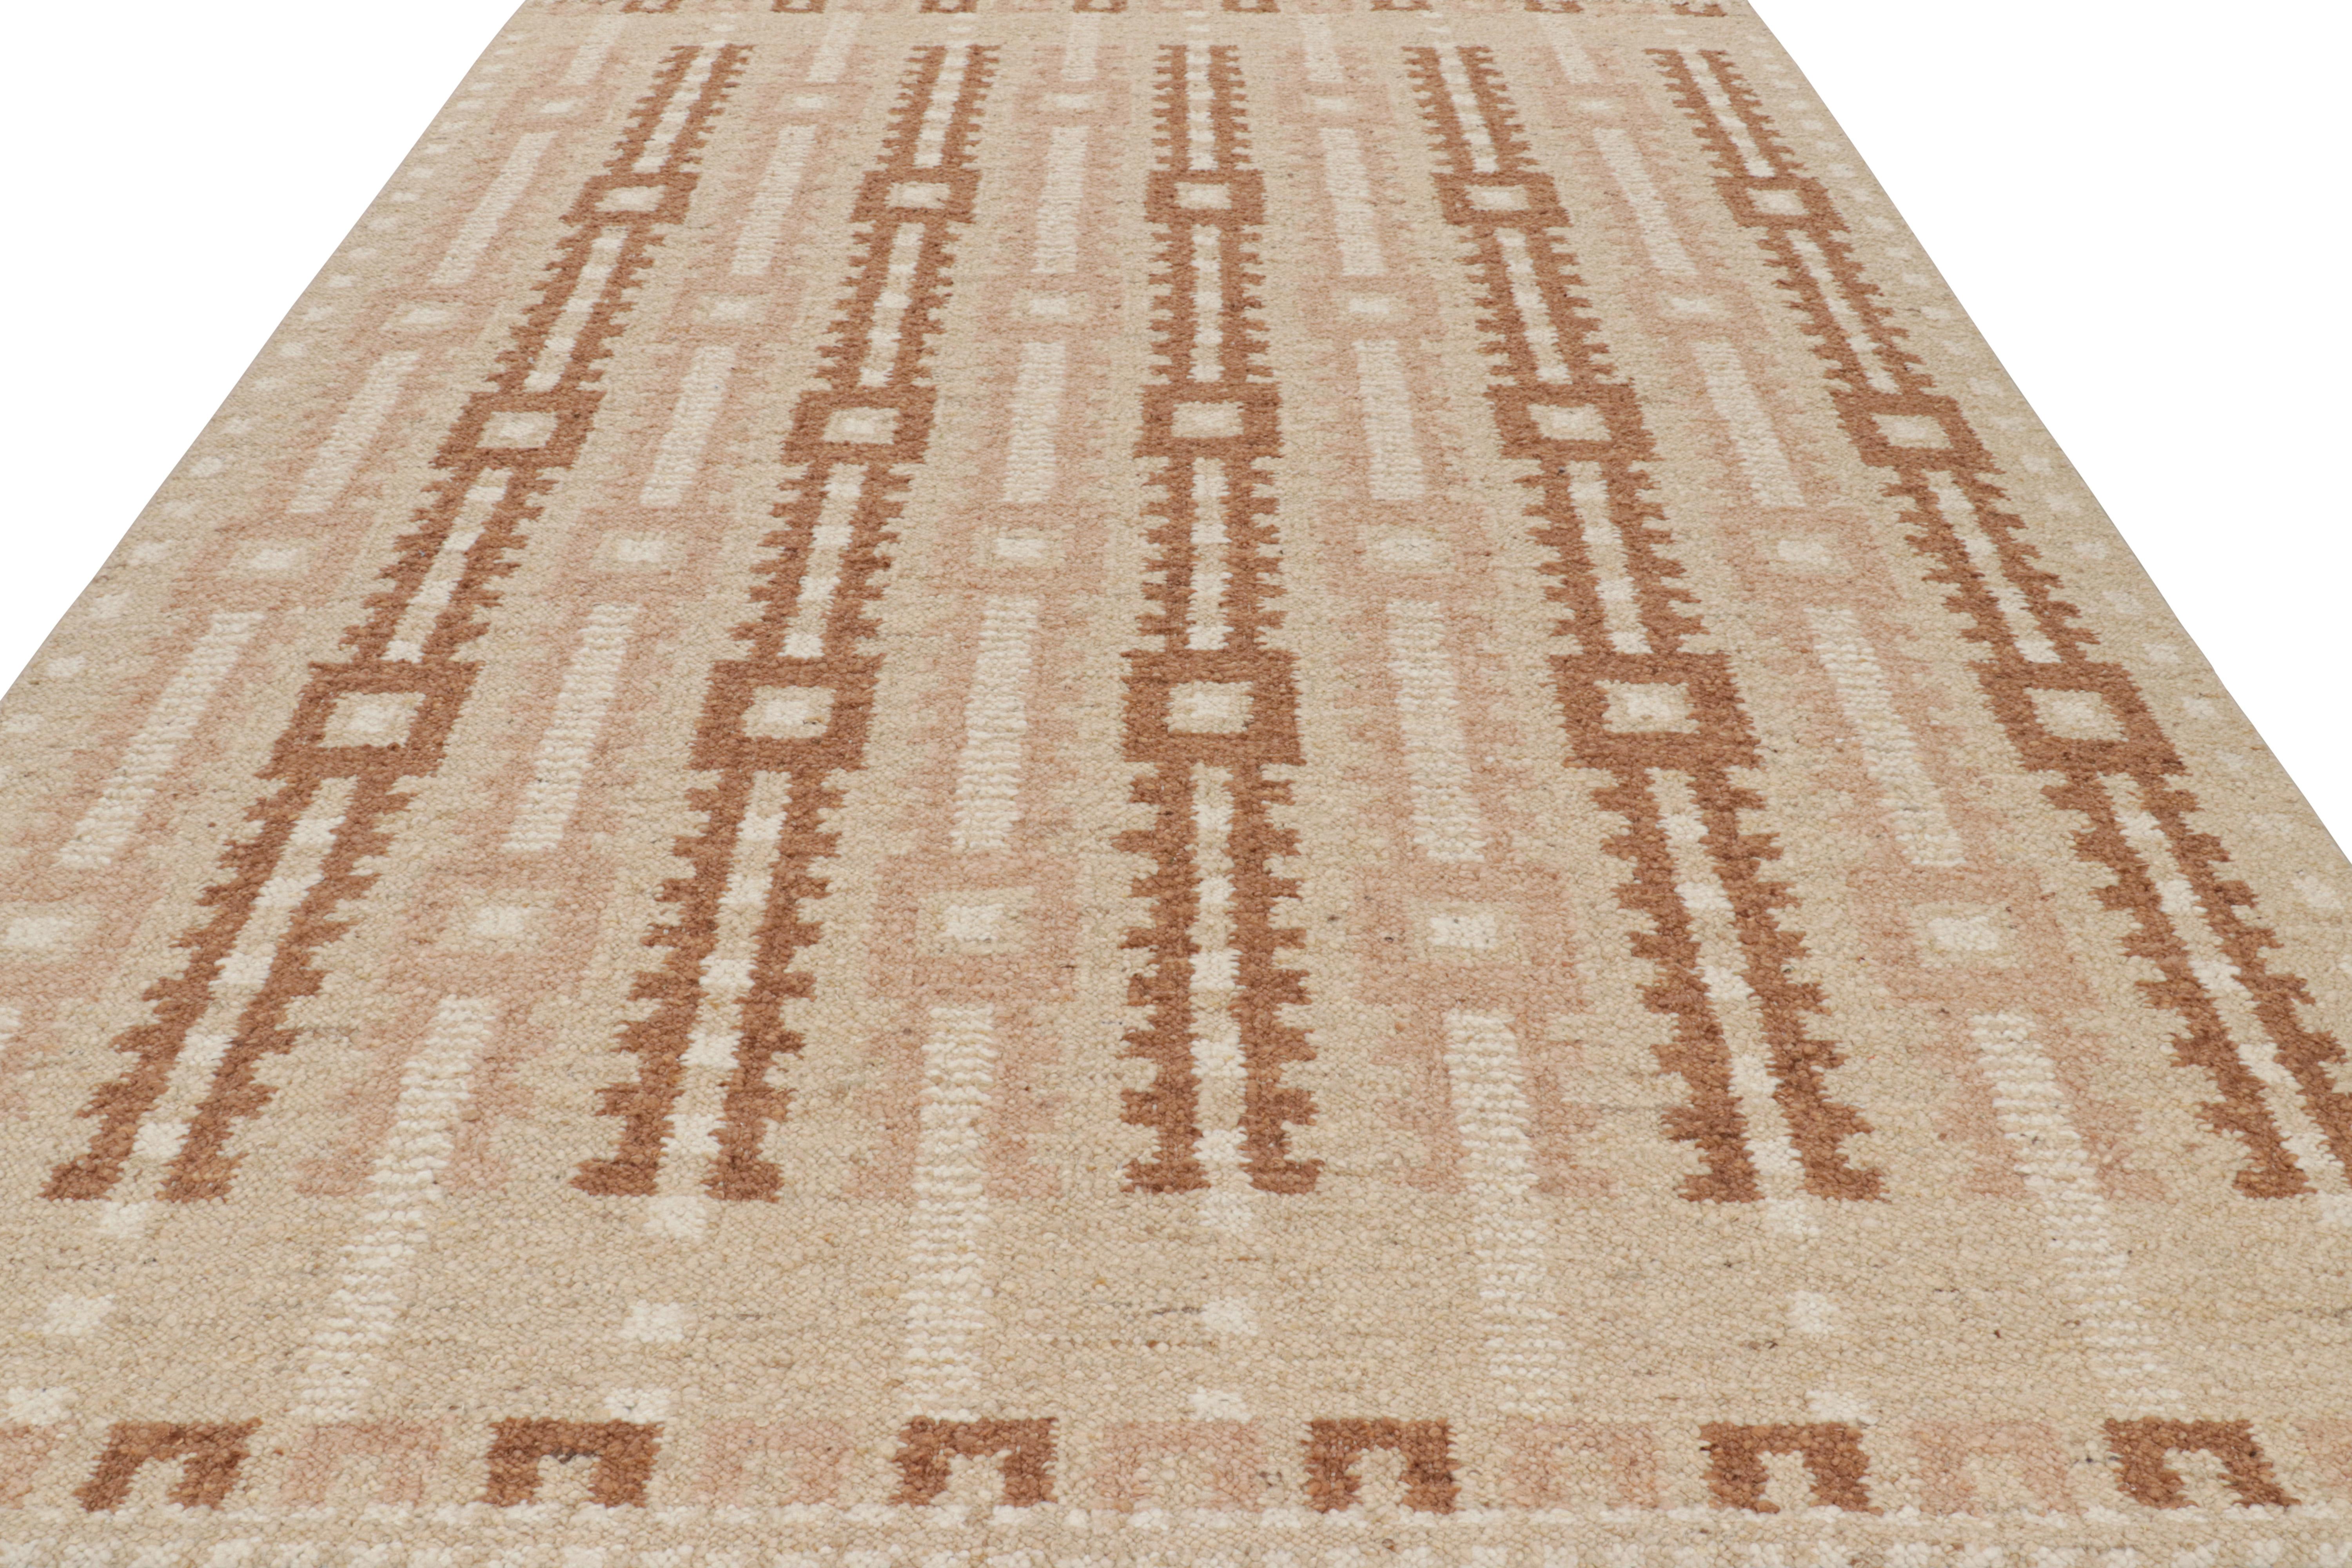 Hand-Woven Rug & Kilim’s Scandinavian Style Rug with Pink, White and Beige-Brown Patterns For Sale